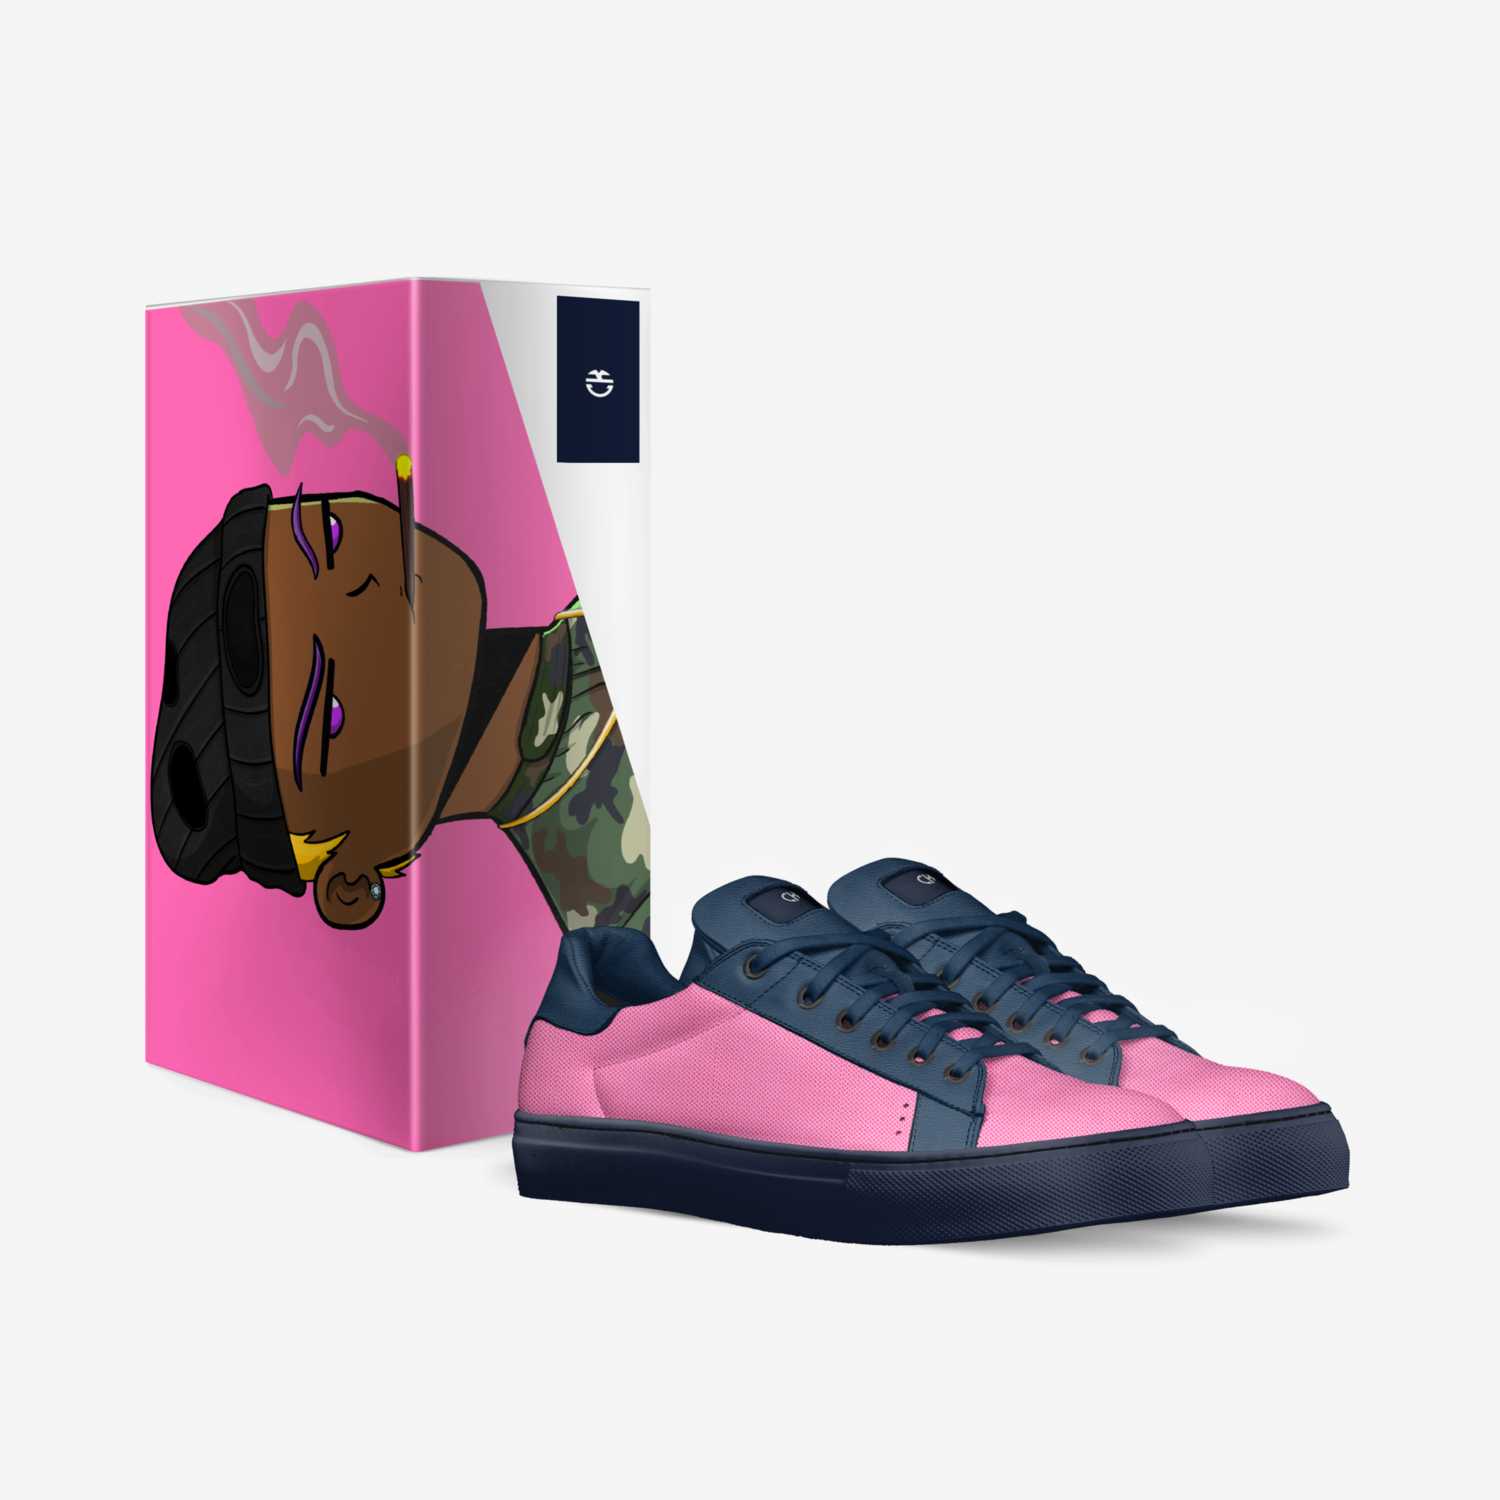 Comeback Kids custom made in Italy shoes by William Smith | Box view